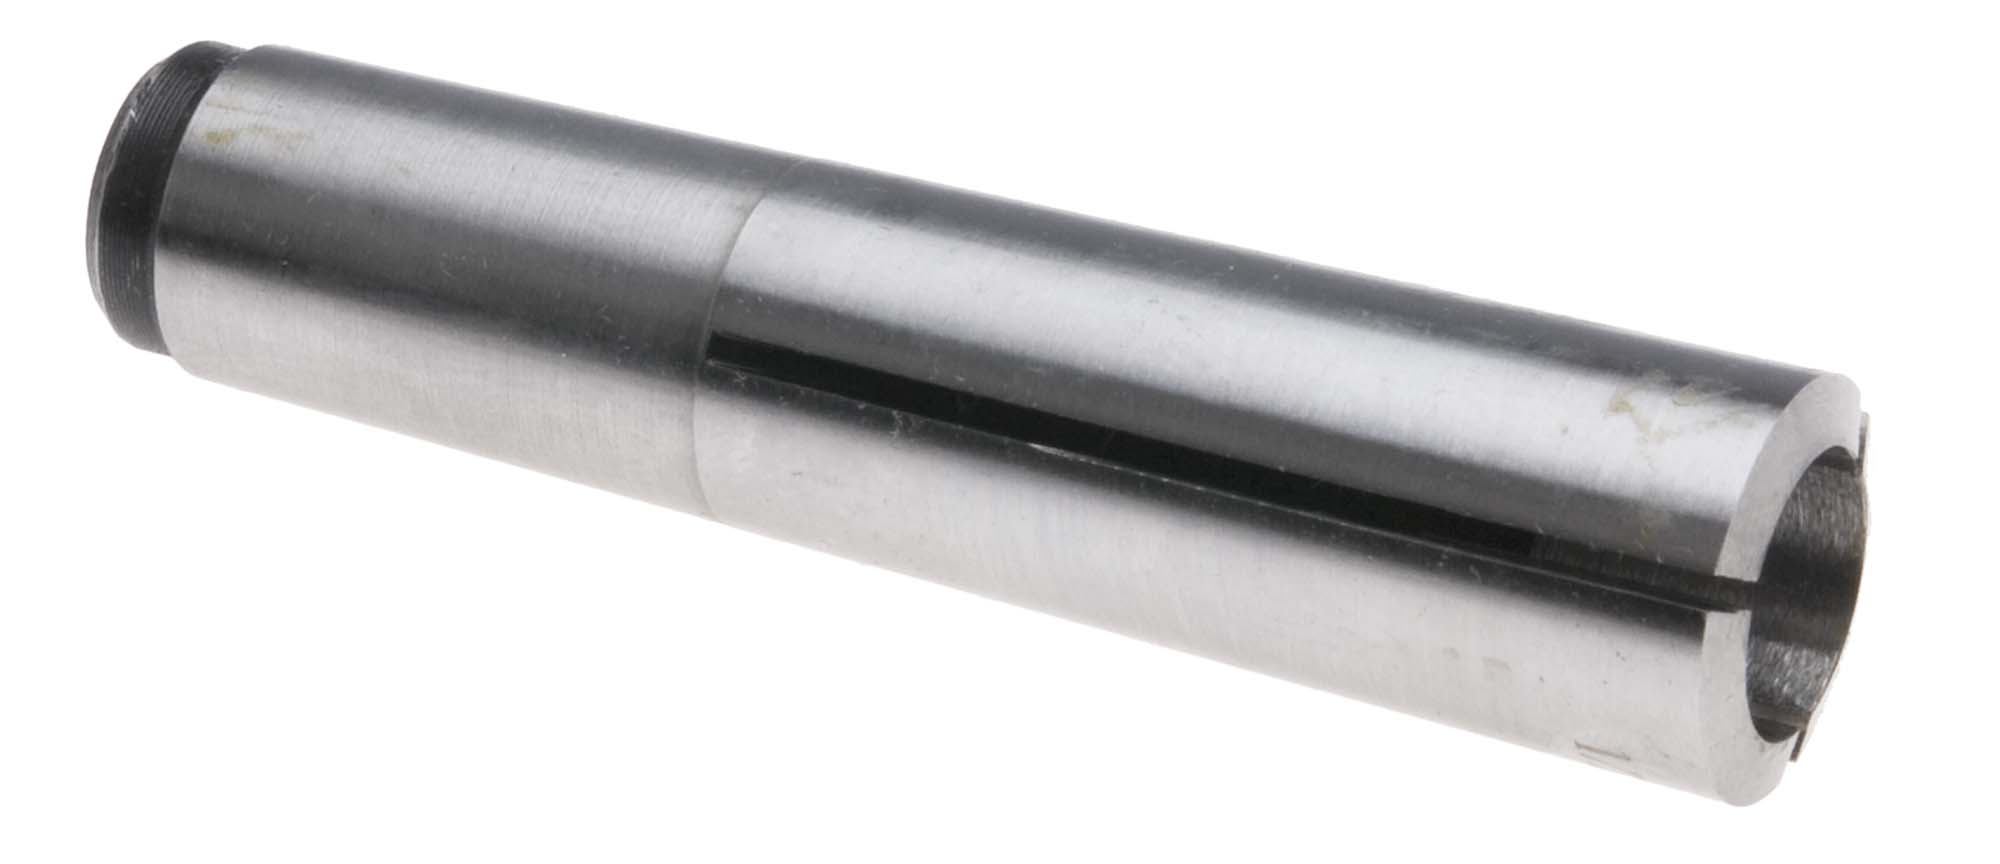 1/2" 7 B and S Taper Collet